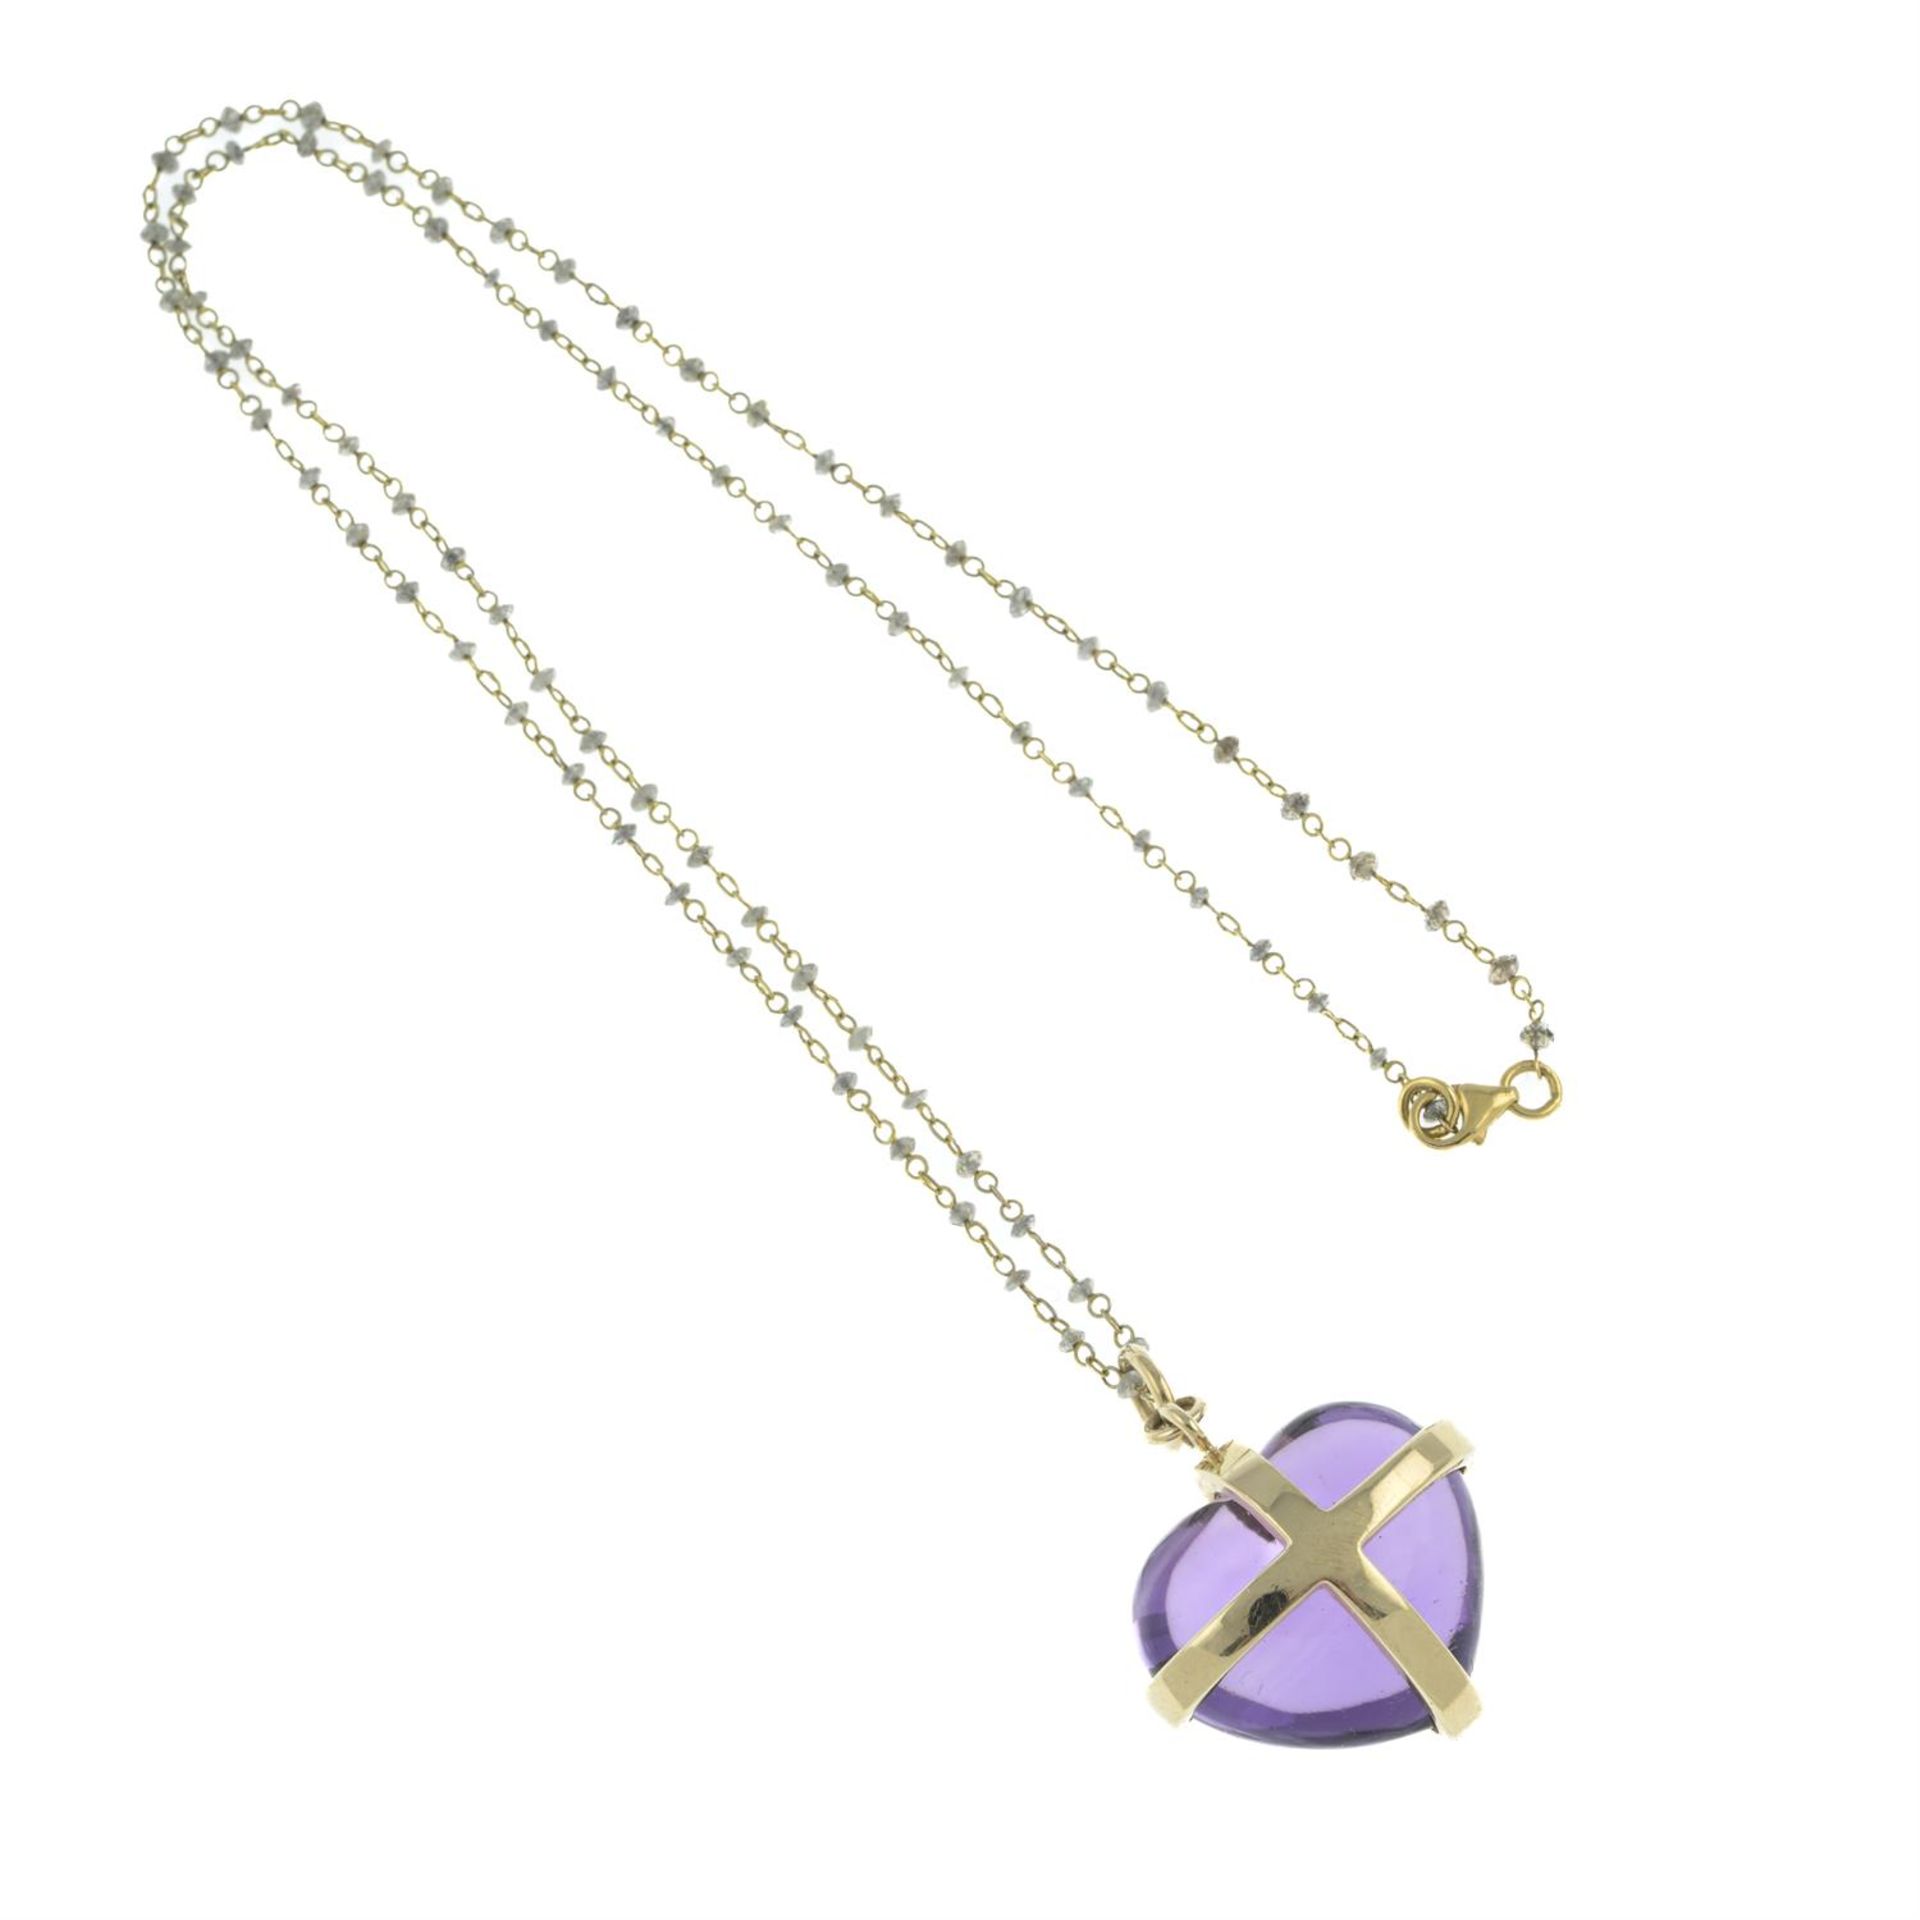 9ct gold amethyst pendant, with diamond spacer chain - Image 2 of 2